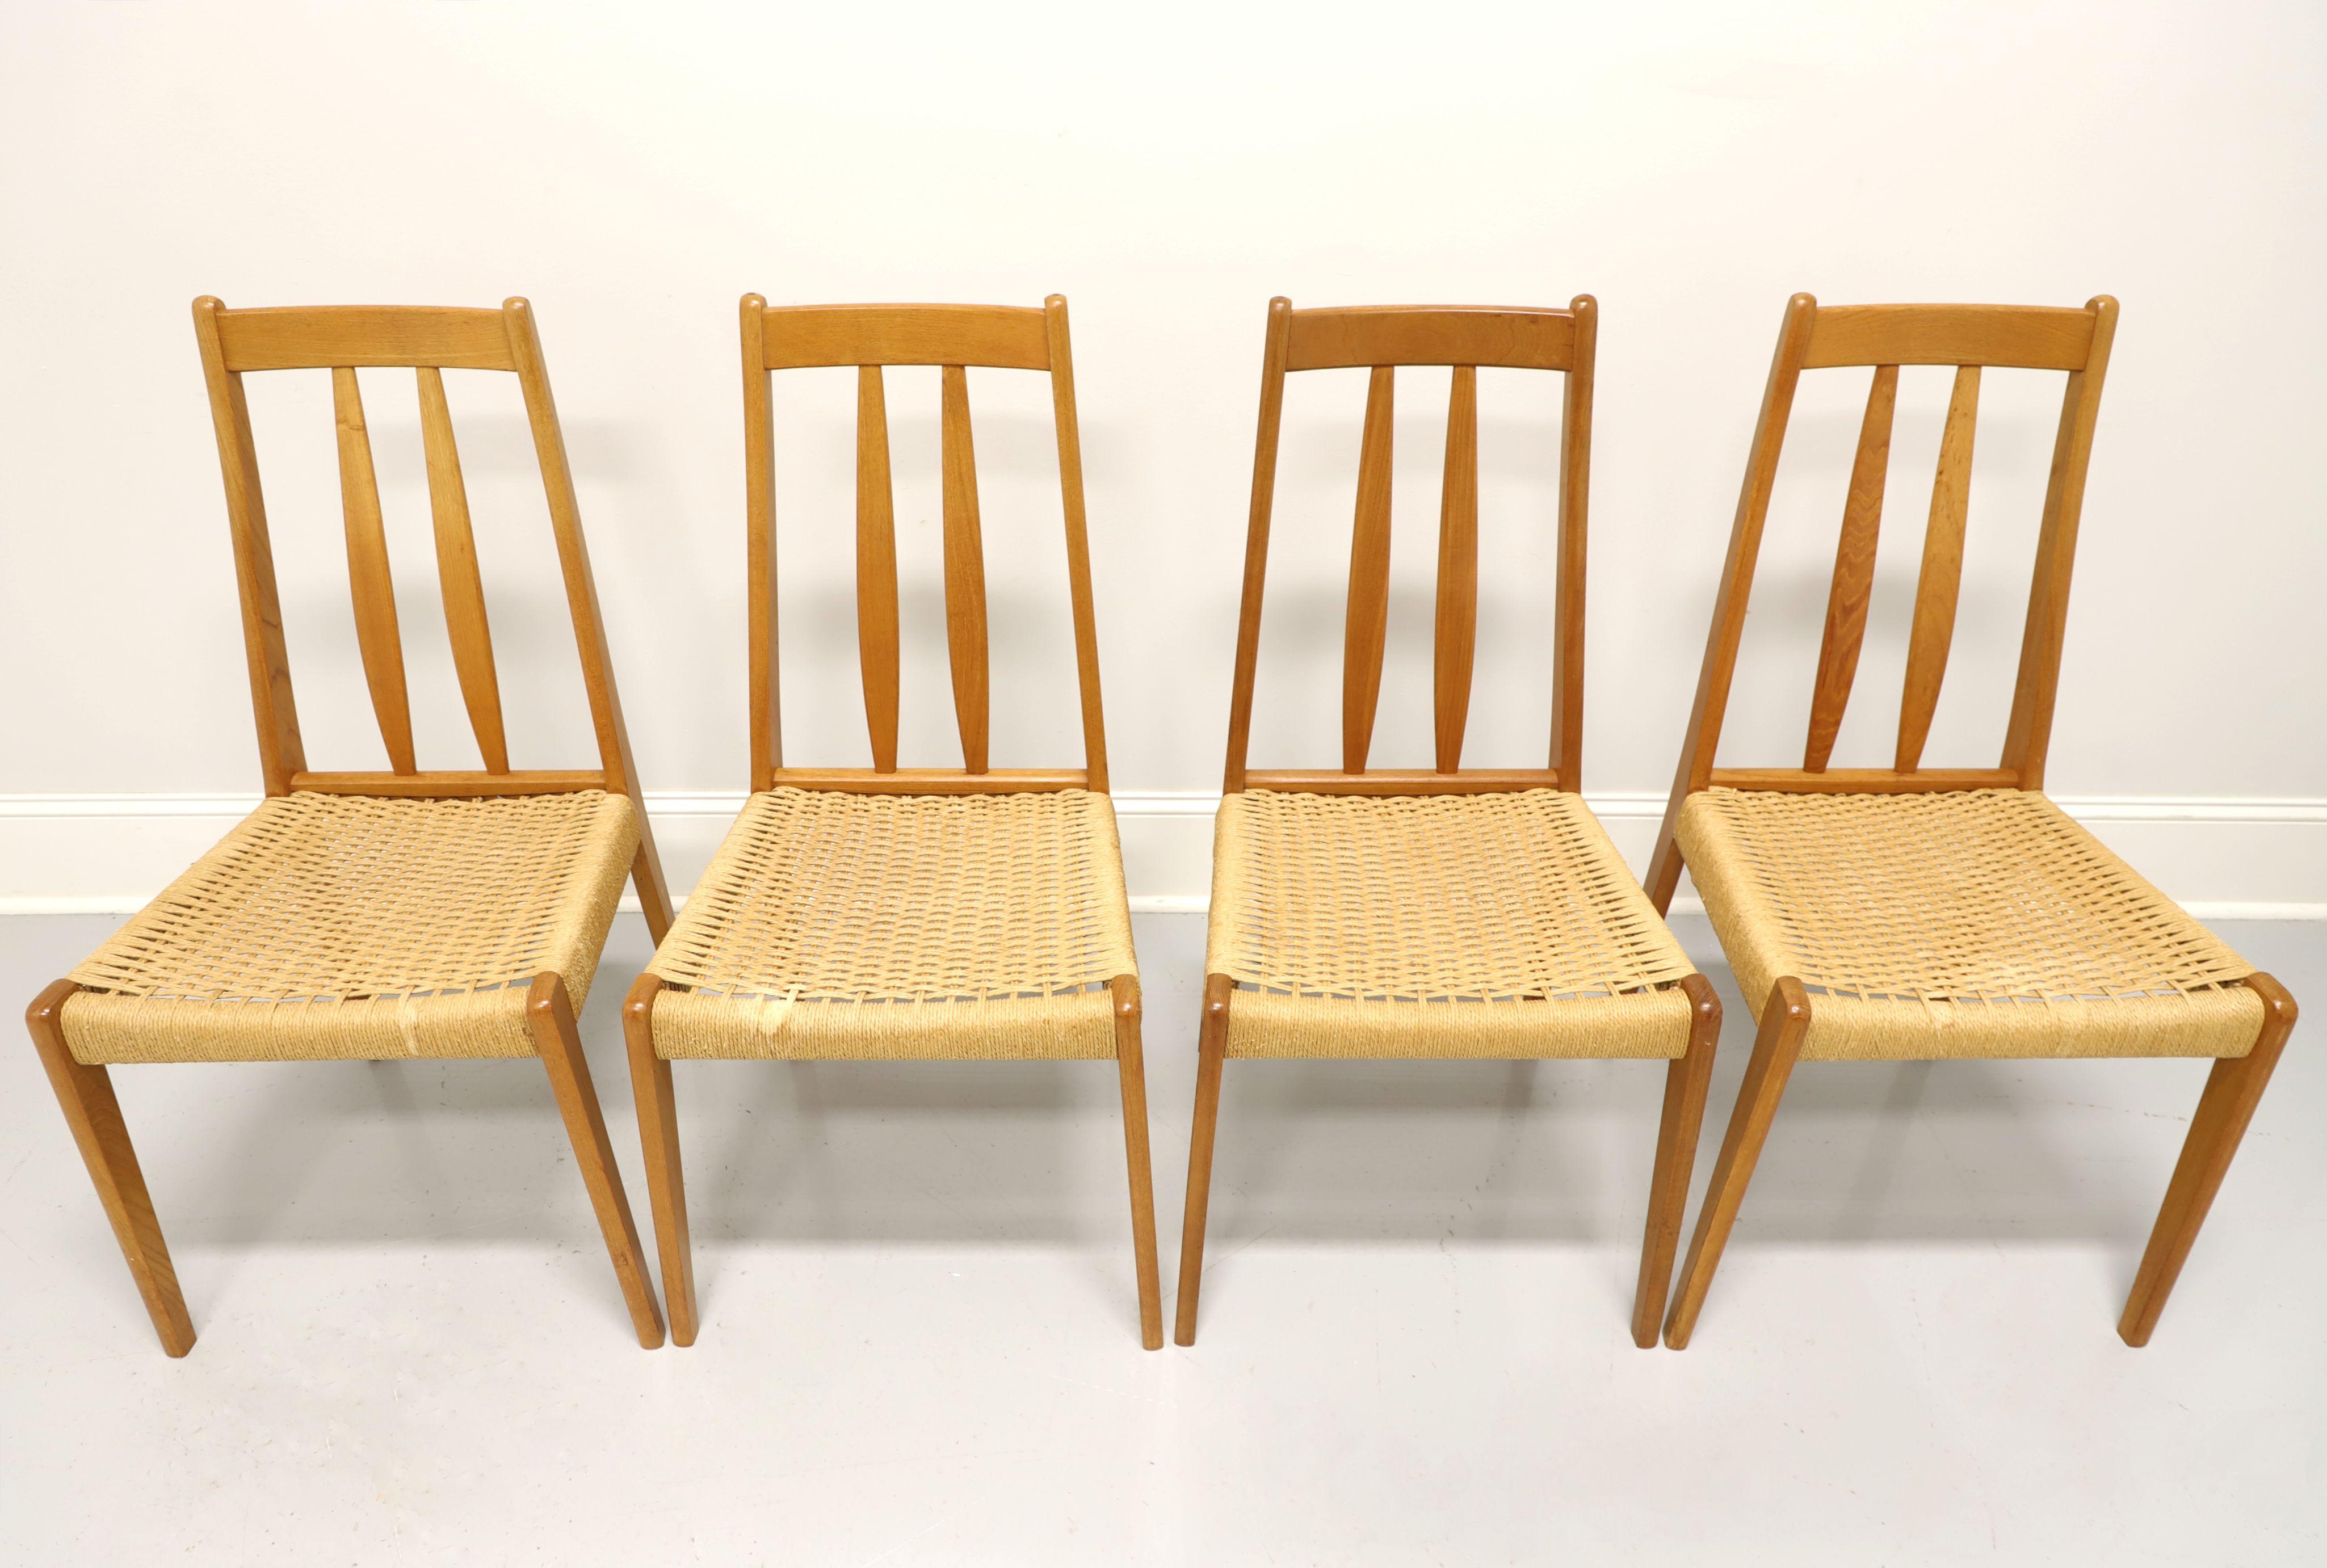 A set of four Mid 20th Century Danish Modern dining side chairs by BRDR FURBO. Solid teak with slat back, rush seat and rounded tapered legs. Made in Spottrup, Denmark, in the mid 20th Century.

Measures: Overall: 18w 20d 36.5h, Seat: 17.75w